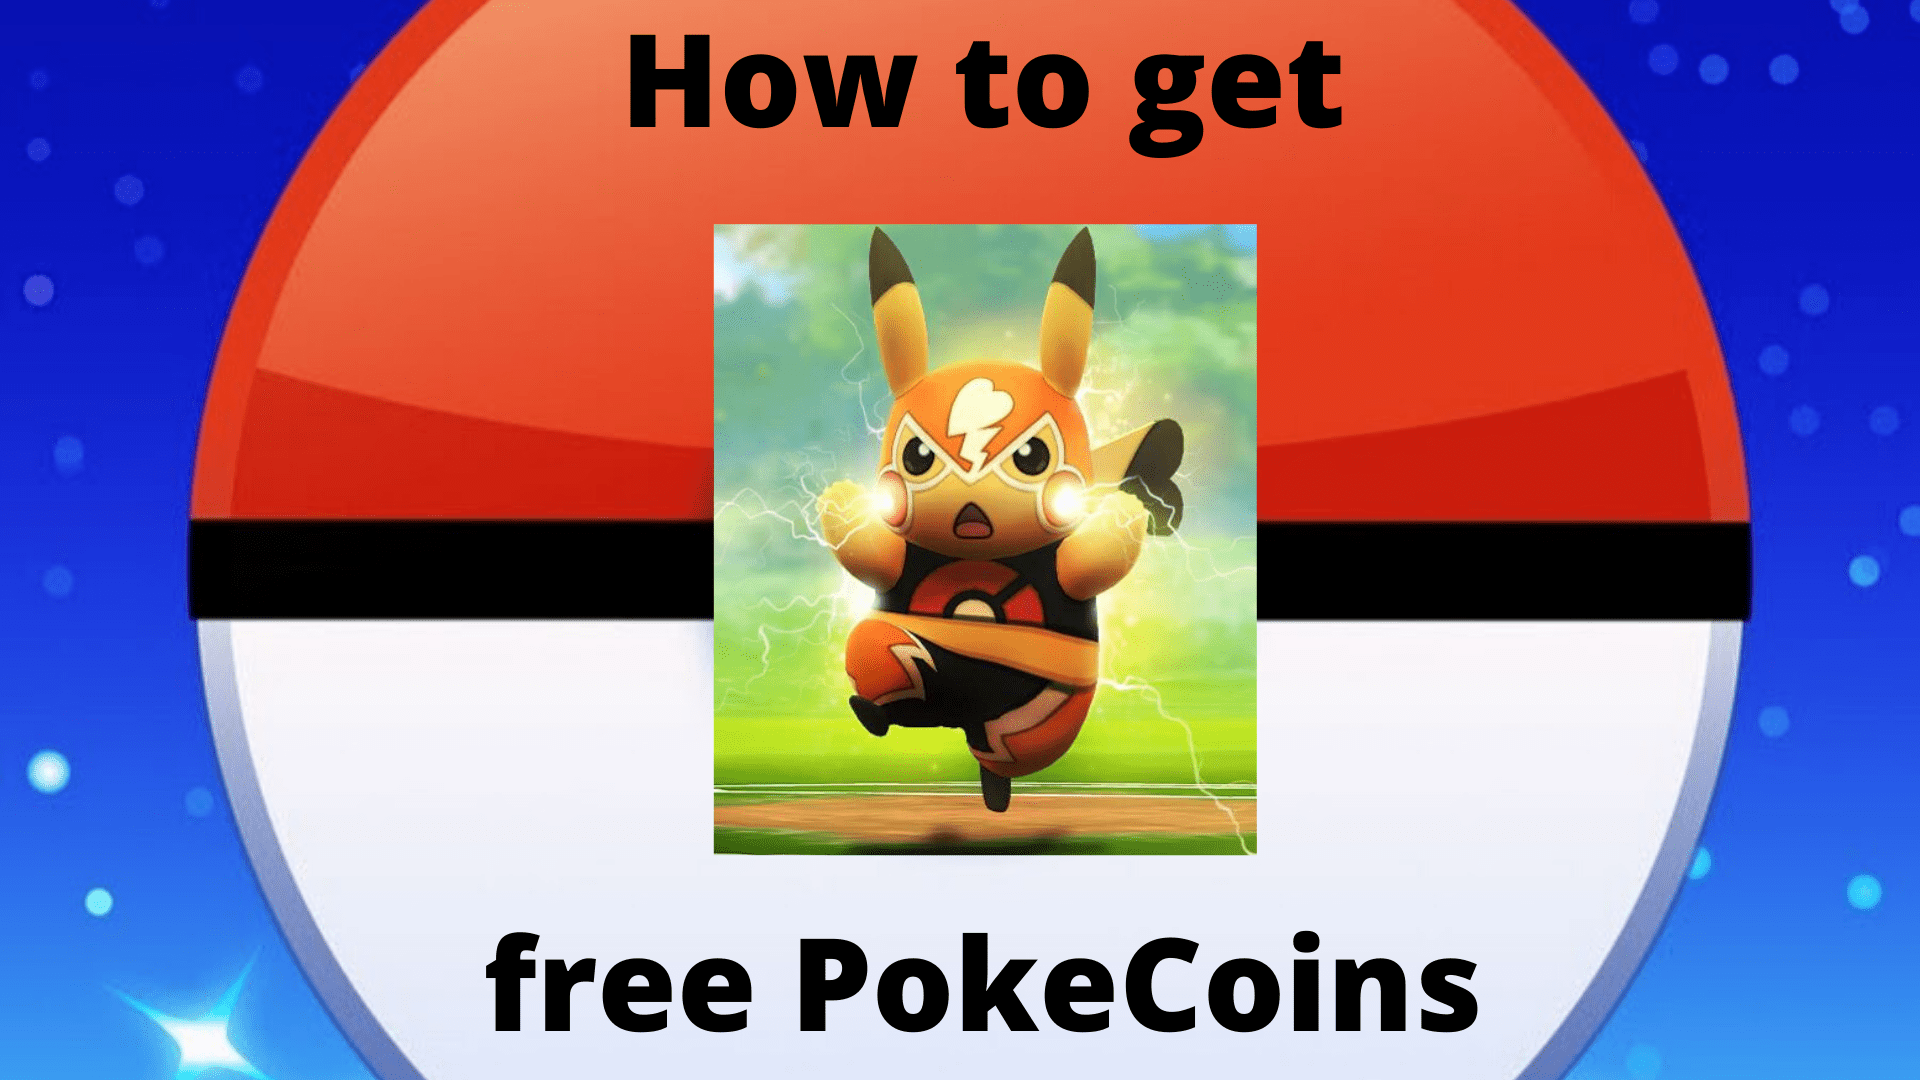 How to get free PokeCoins